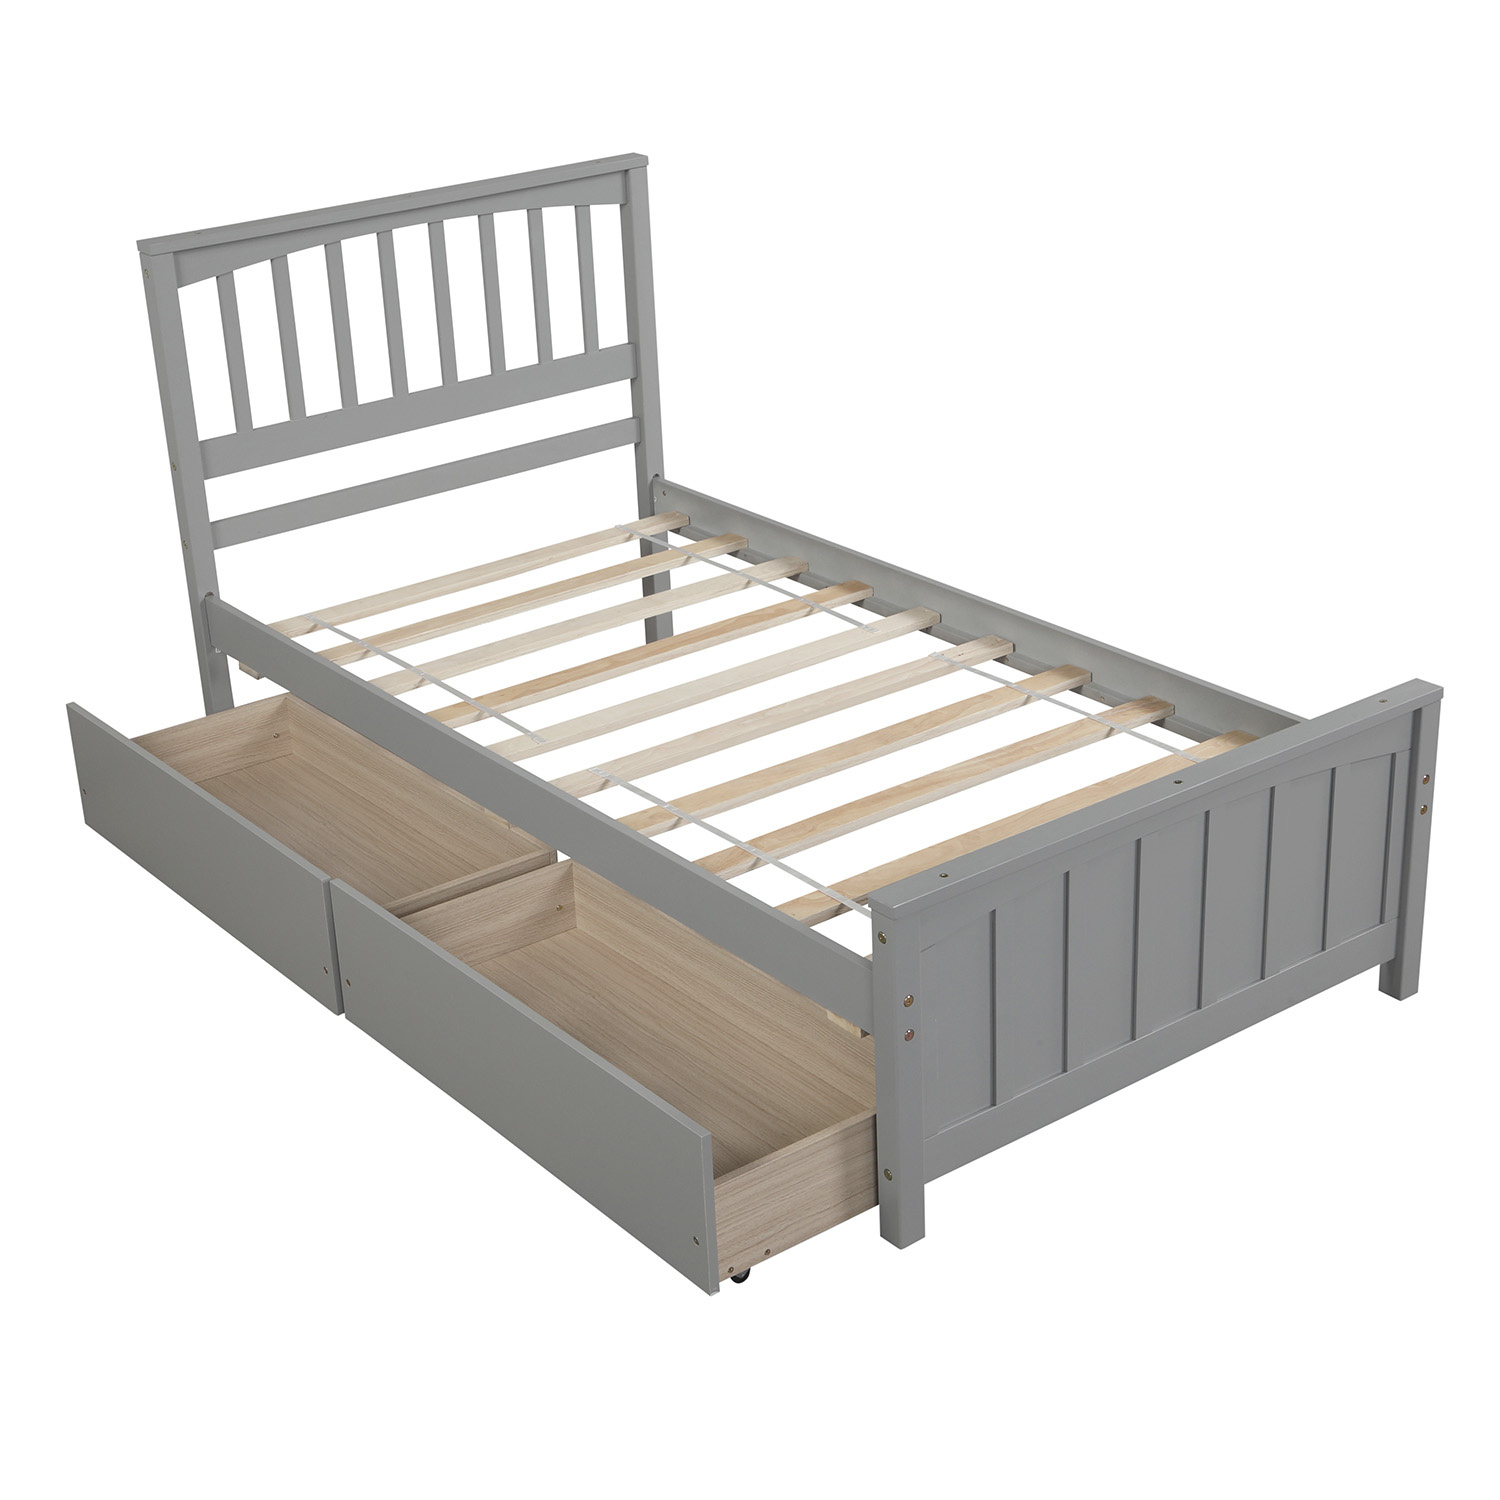 Twin Size Platform Bed with 2 Drawers, Classic Solid Wood Bed Frame with Headboard and Under-Bed Storage Space, for Kids Teens Adults Bedroom Furniture, No Box Spring Need, Grey - image 3 of 6